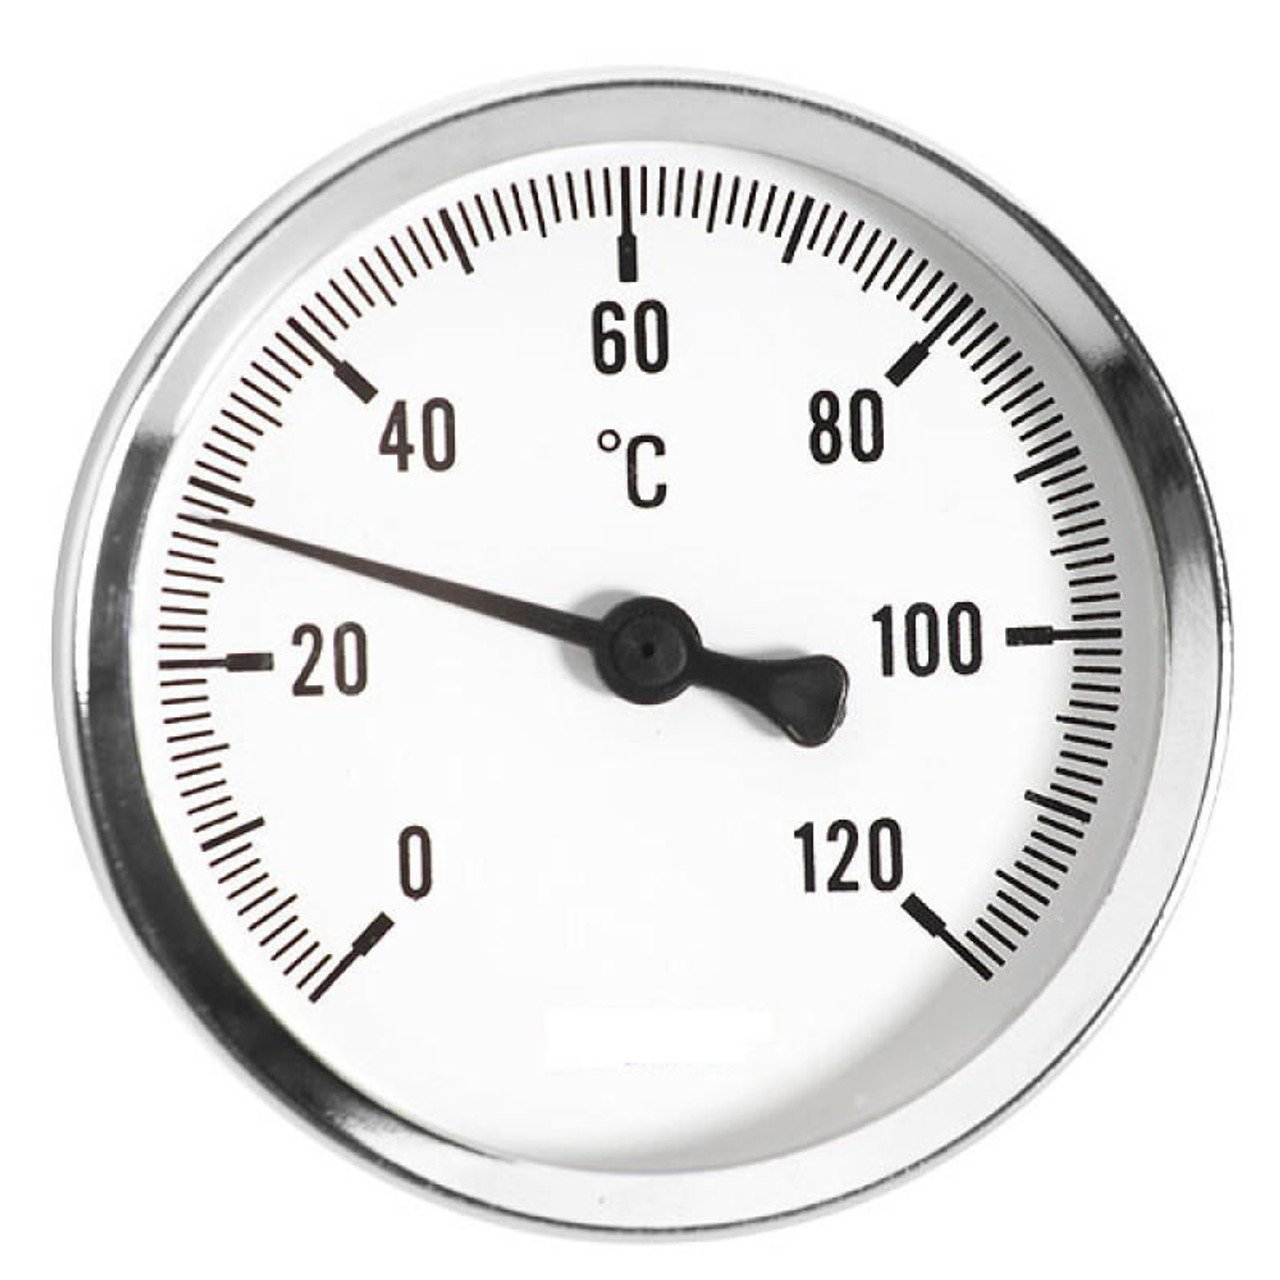 Common Types of Temperature Gauges and Their Applications